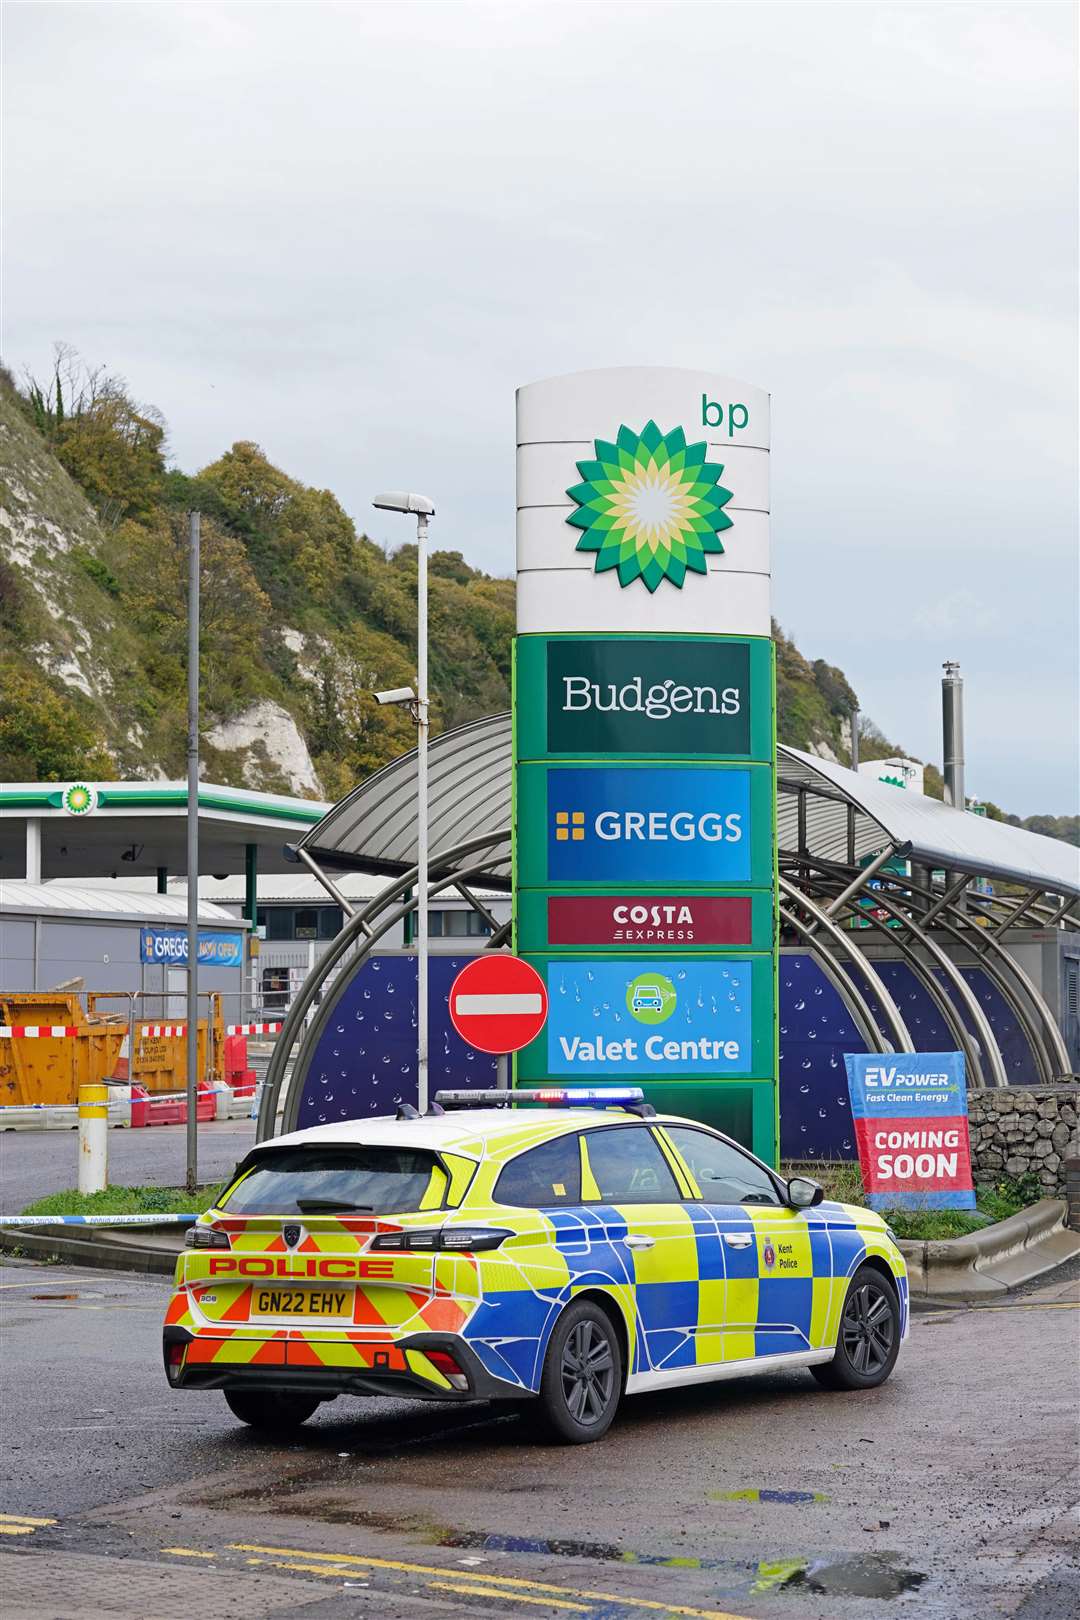 A police car at a petrol station near the migrant processing centre in Dover, Kent, following the incident. Picture: PA